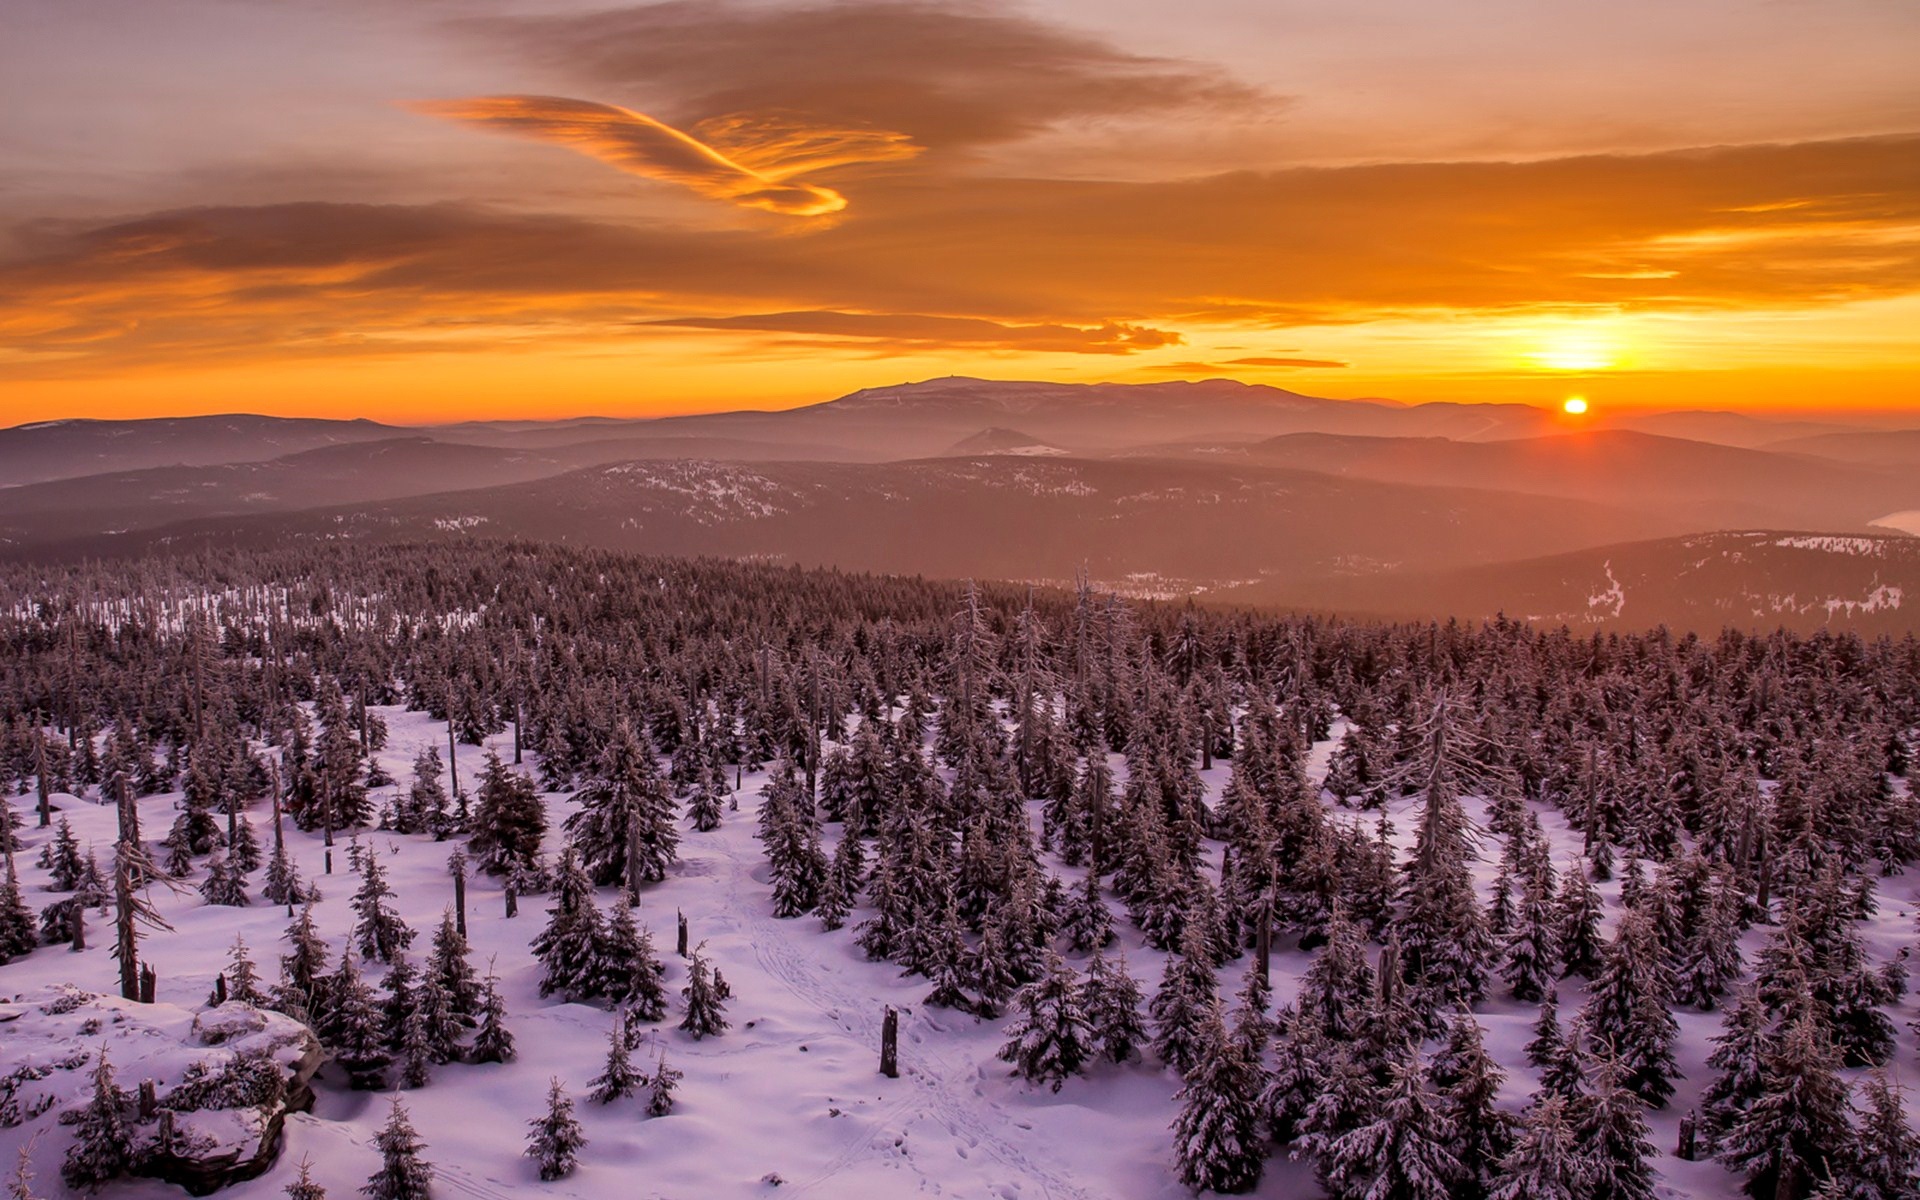 Winter, sunset, trees, snow, mountains, red sky wallpaper | nature and